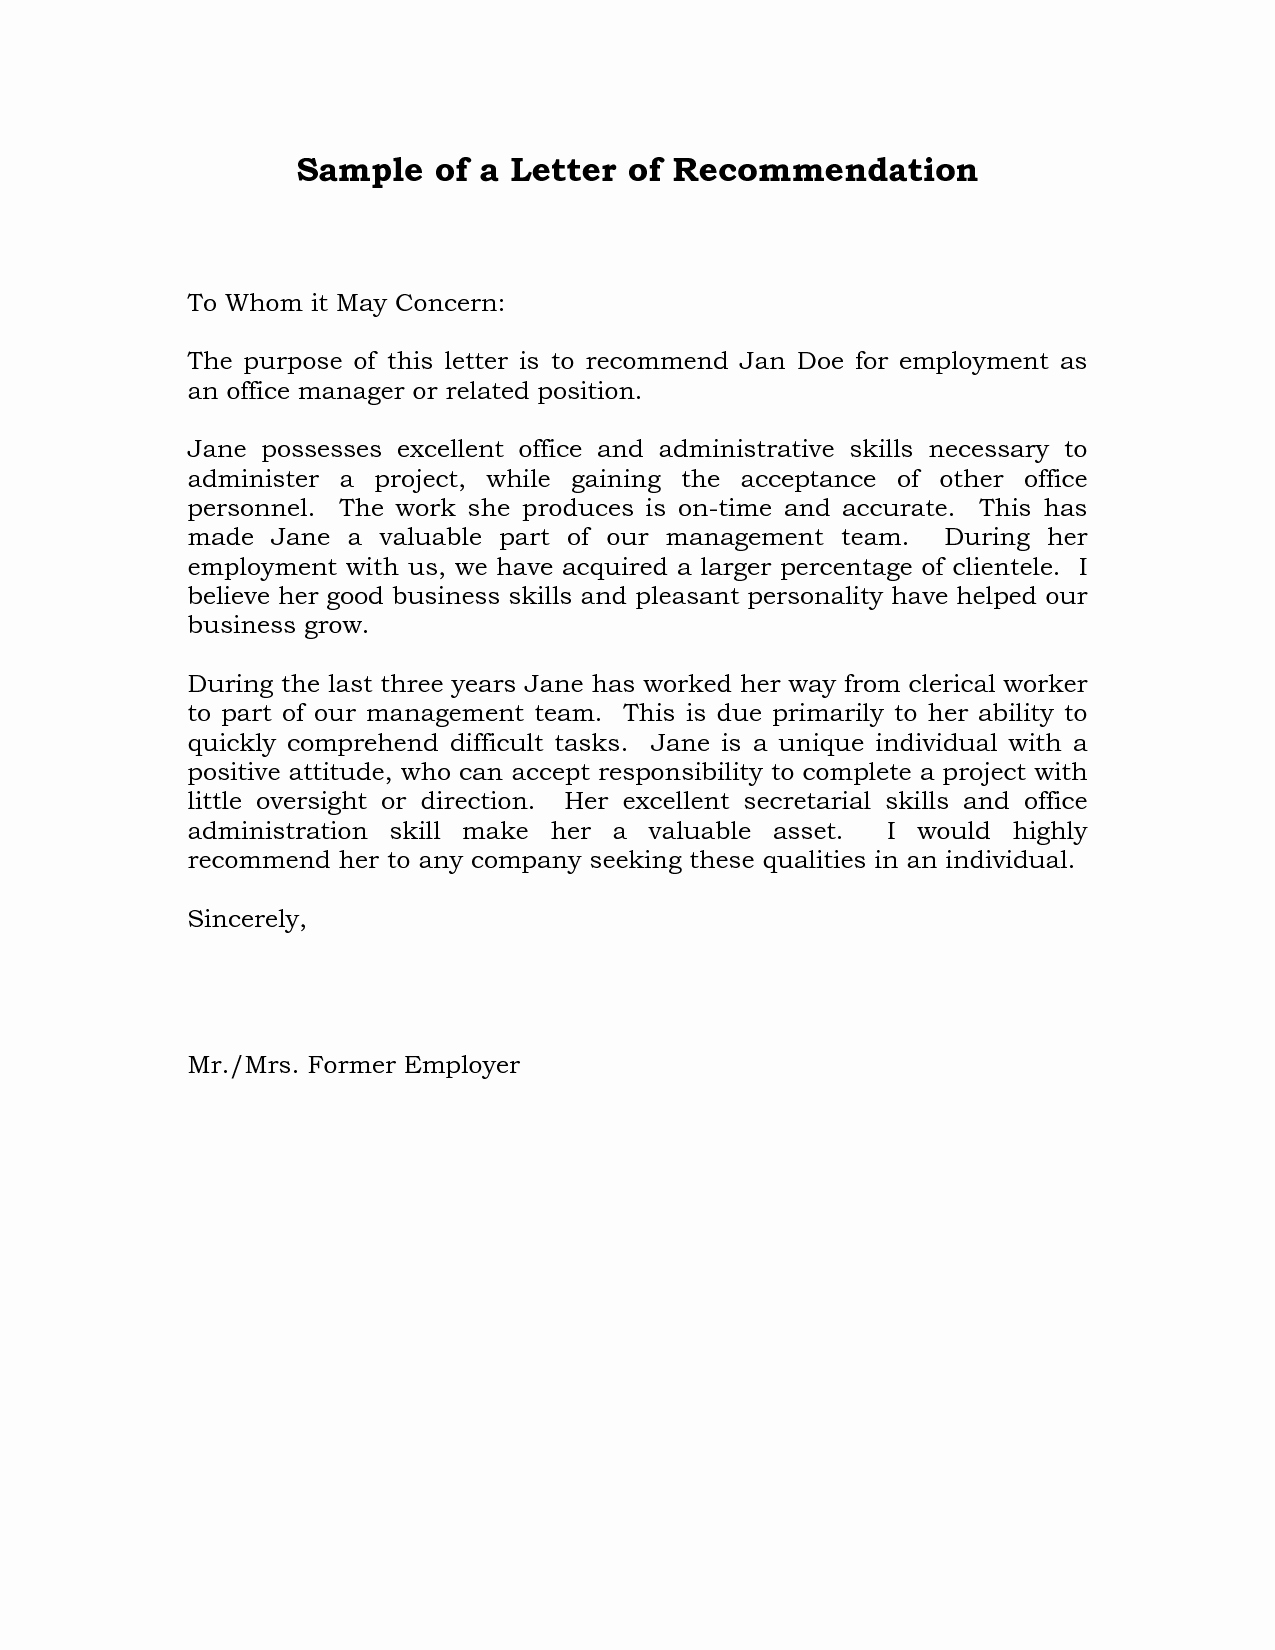 Sample Professional Letter Of Recommendation Fresh Reference Letter Of Re Mendation Sample